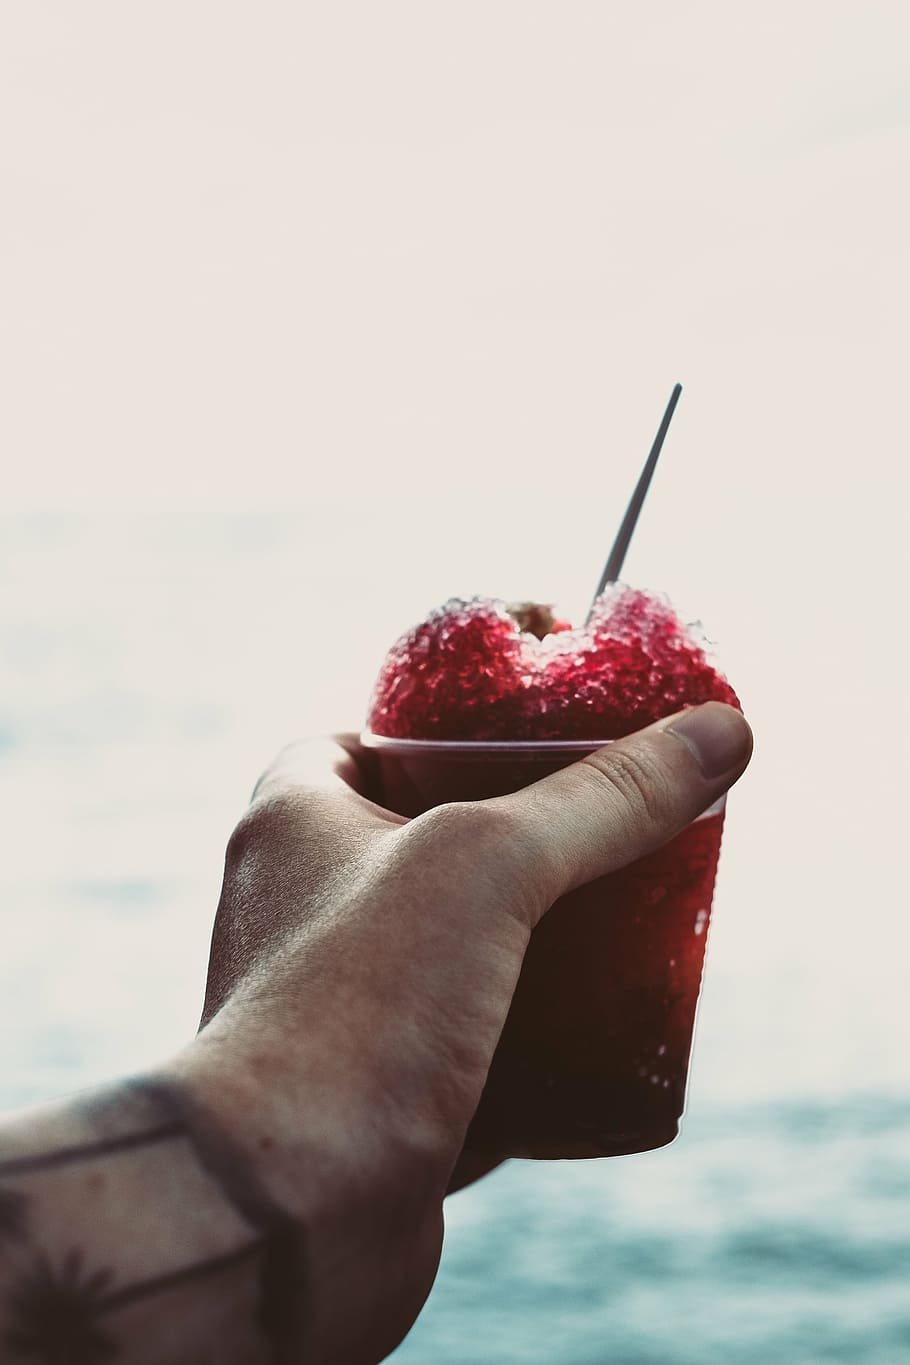 man holding smoothoe, people, hand, art, tattoo, drinks, beverage, red, strawberry, cold